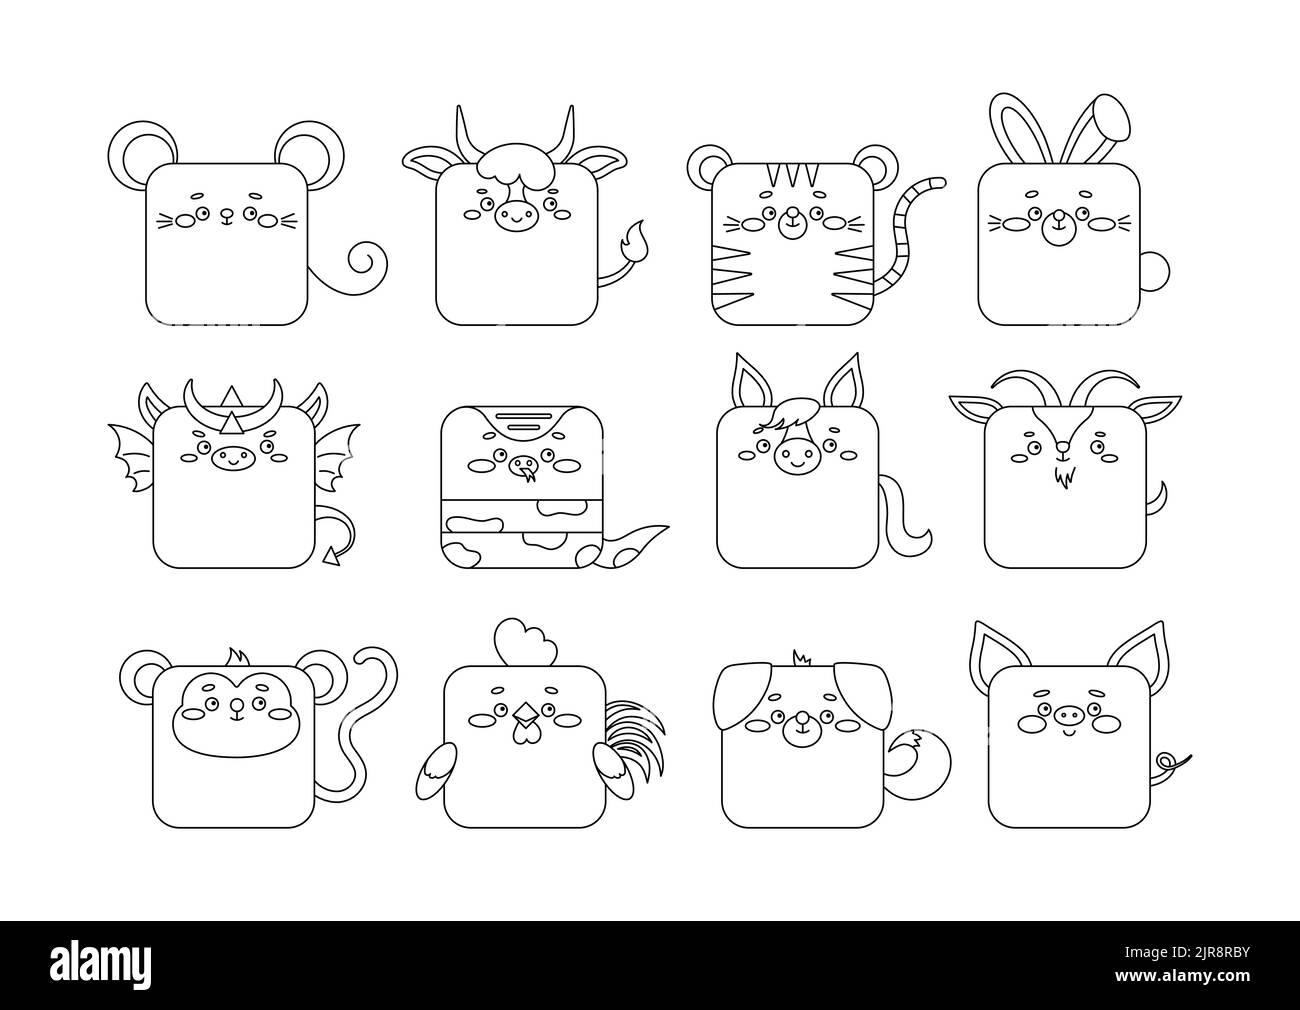 12 Chinese zodiac animal character sqaure faces line art icon vector set. Cute linear sshape square head of dragon, monkey snake, pig, dog, rooster Stock Vector